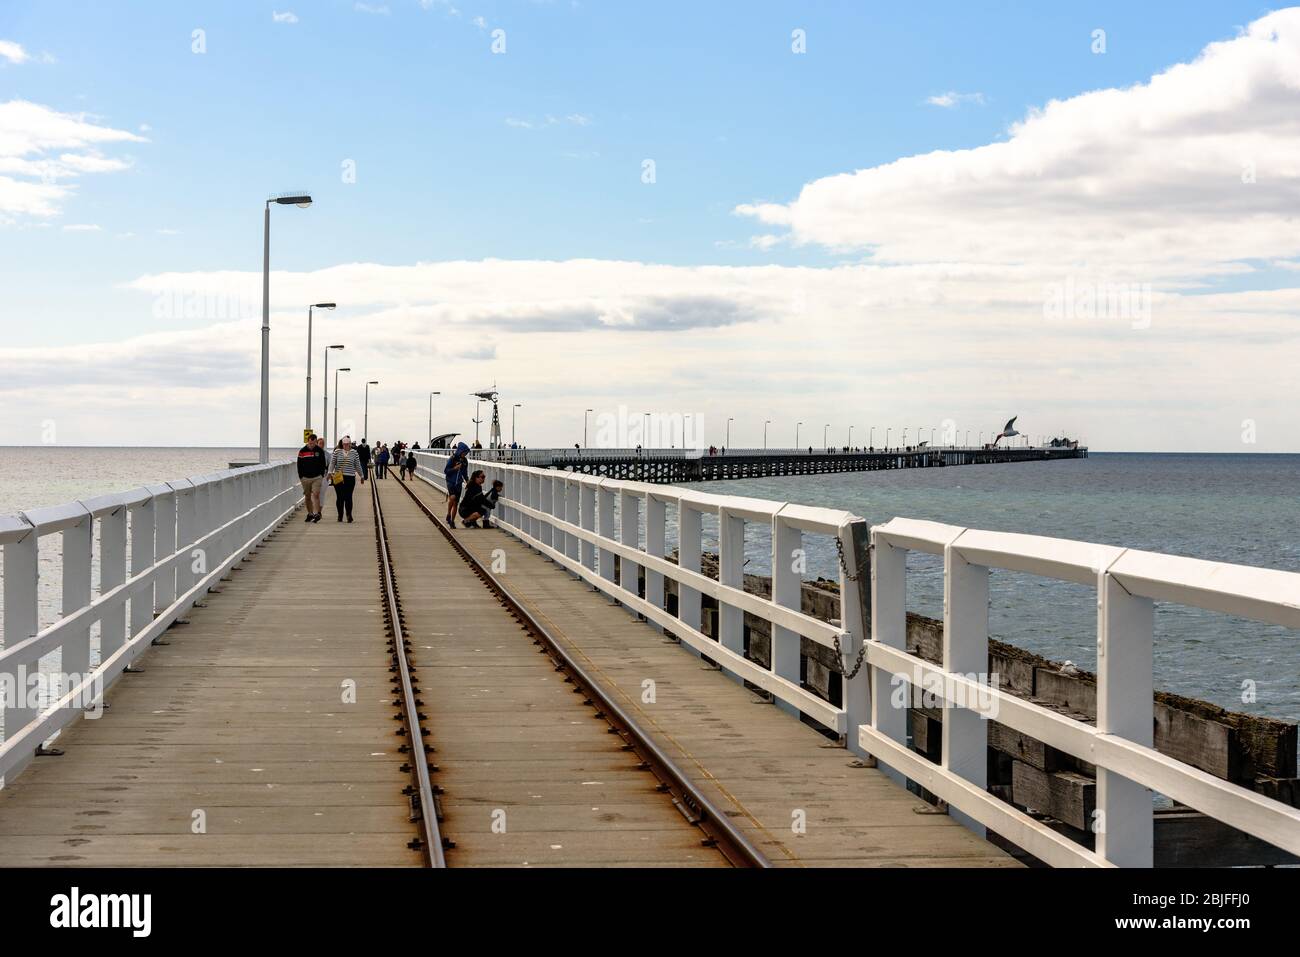 Looking out toward the Indian Ocean on the Busselton Jetty Stock Photo